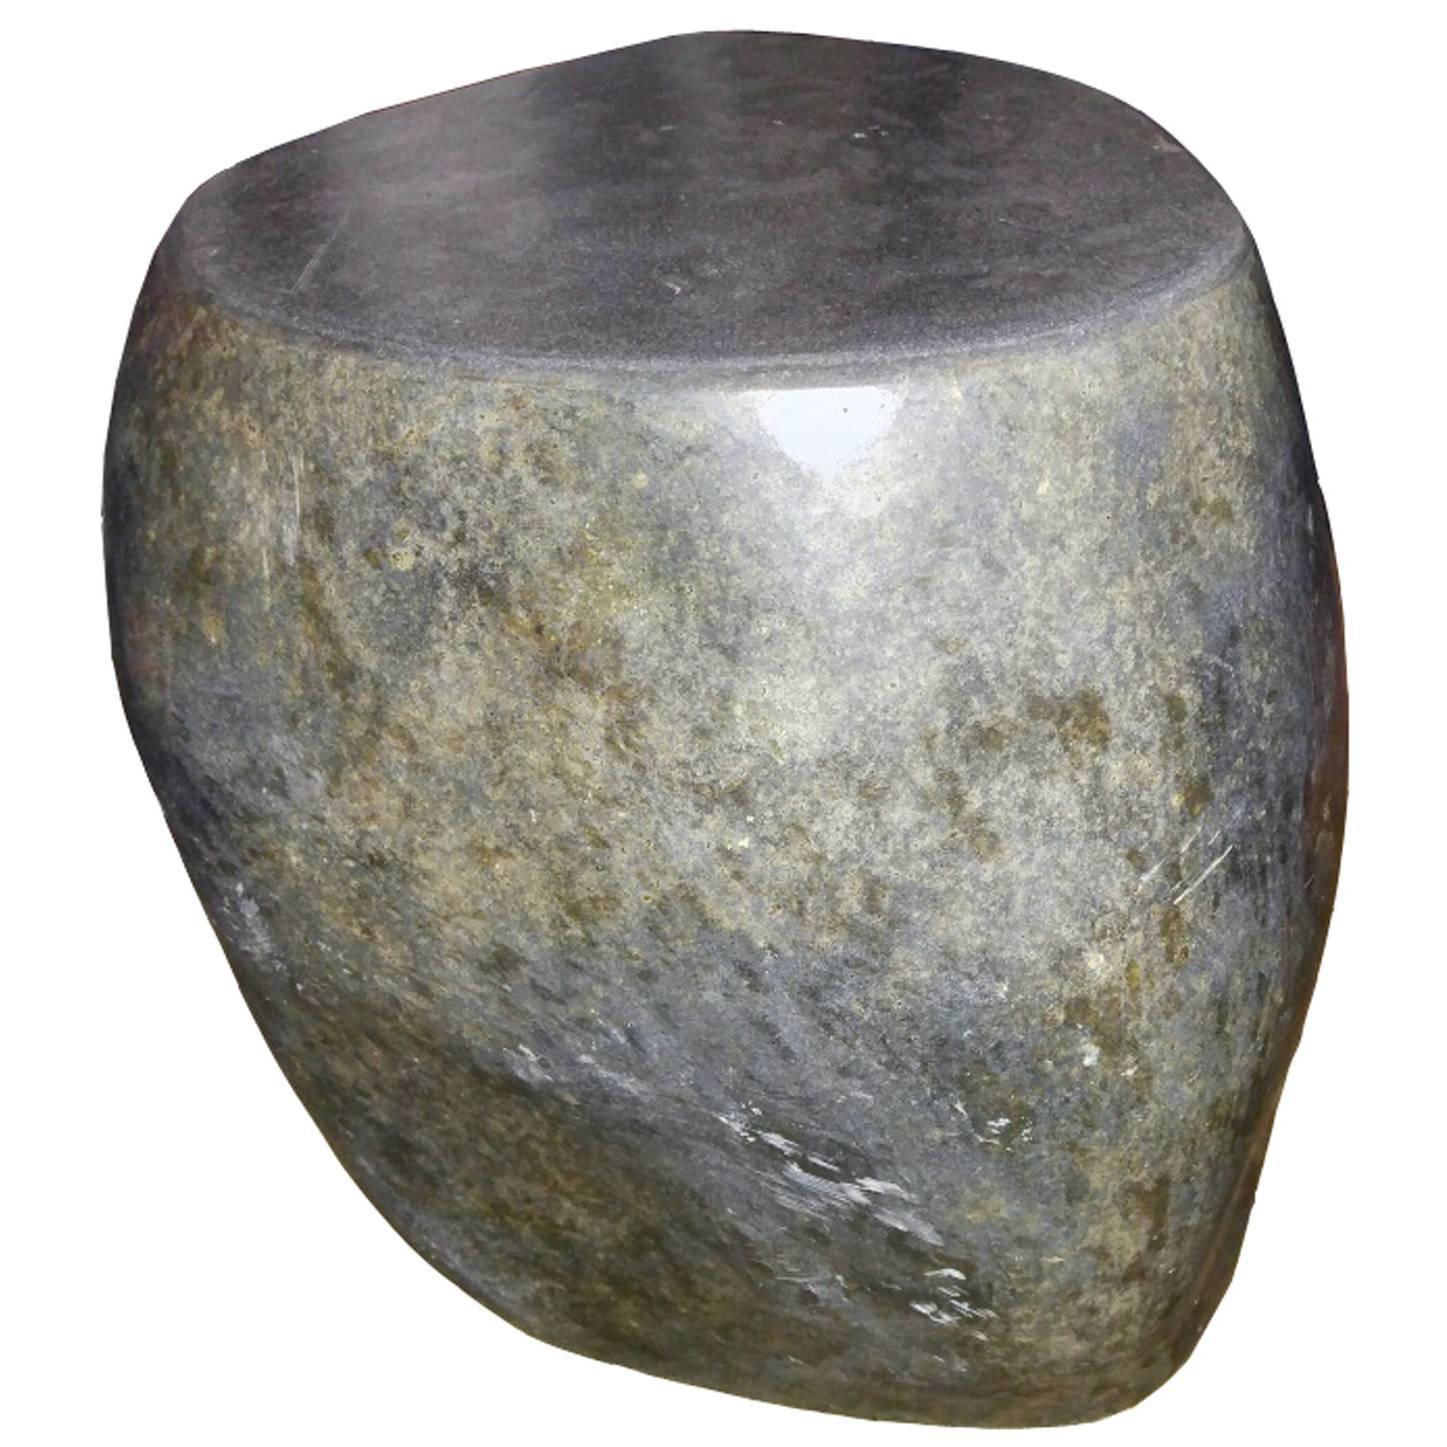 Stone End Table